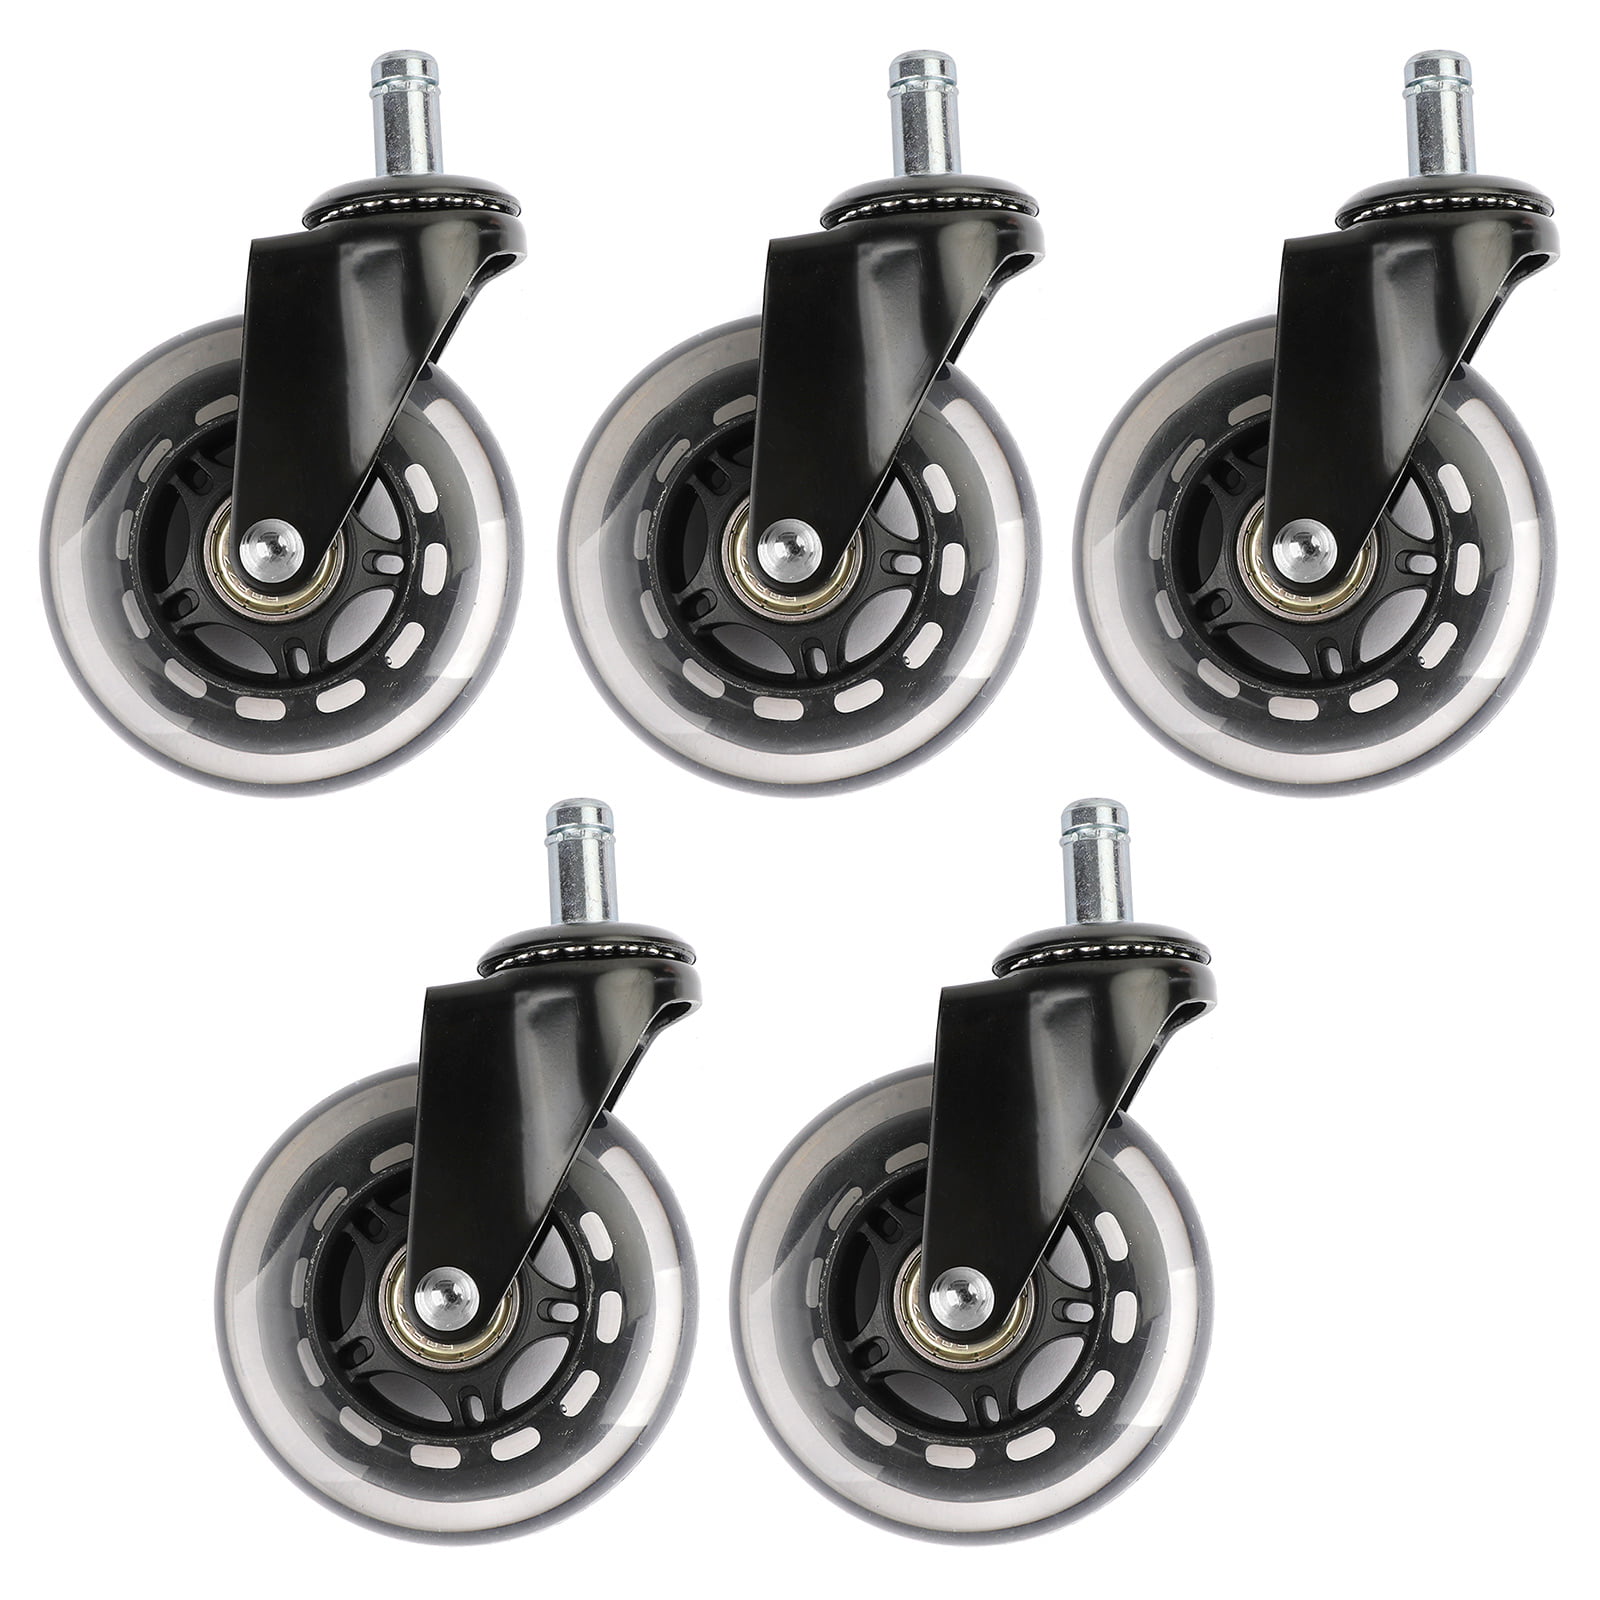 Set of 5 Office Chair Caster Swivel Wheels Replacement